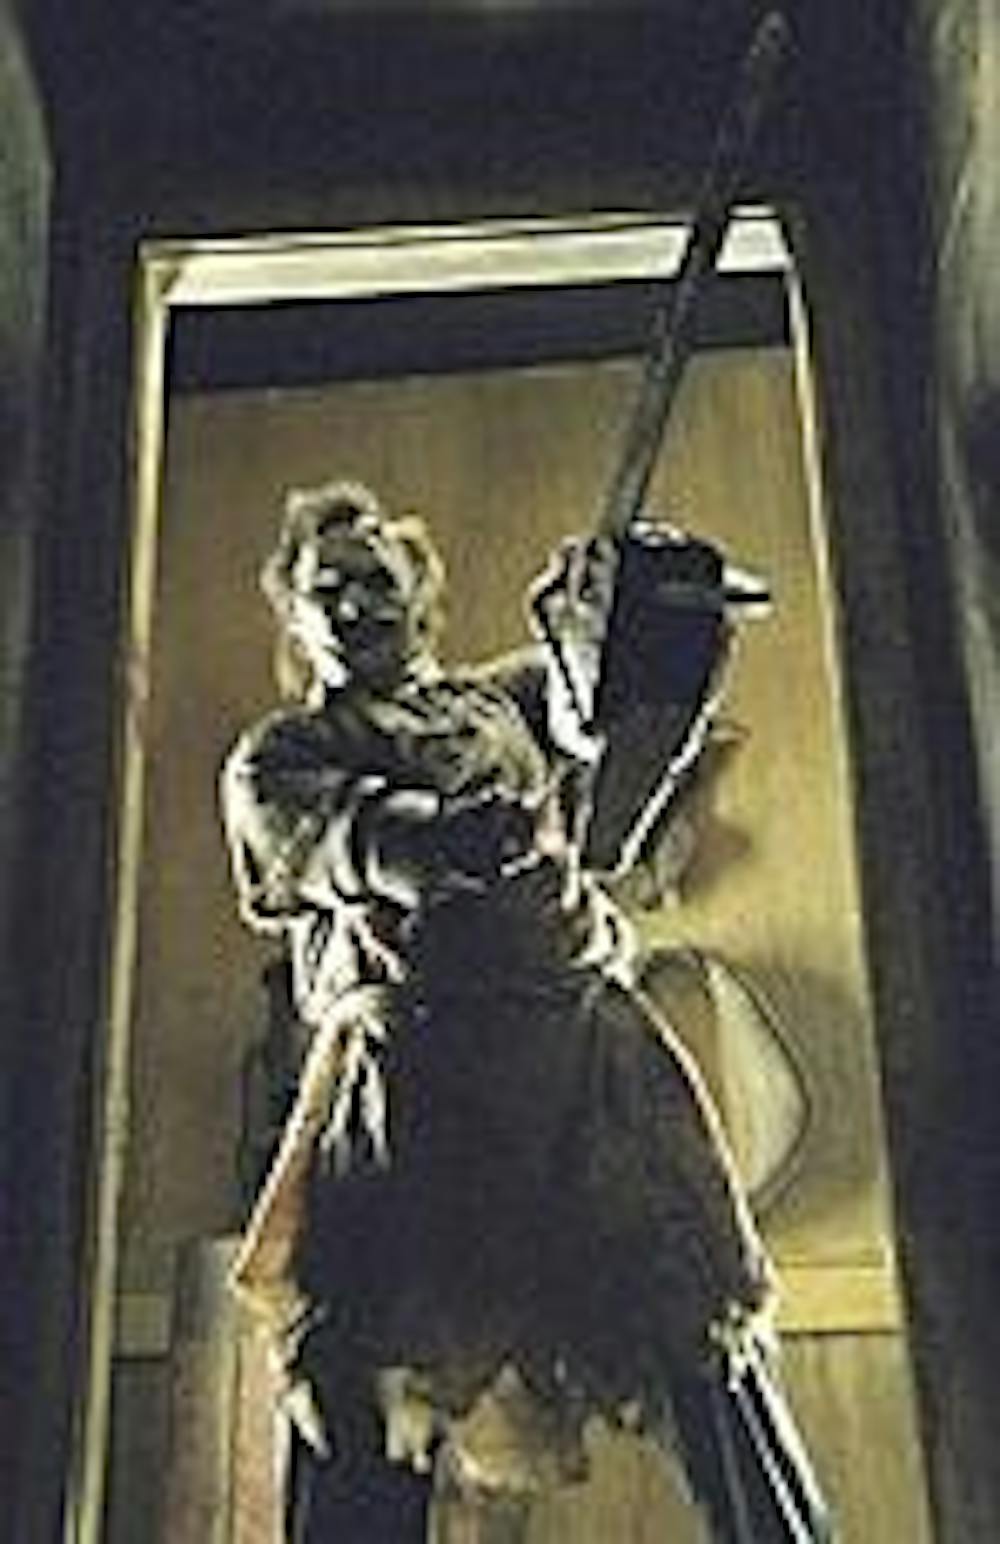 Leatherface displays his favorite tool once again.